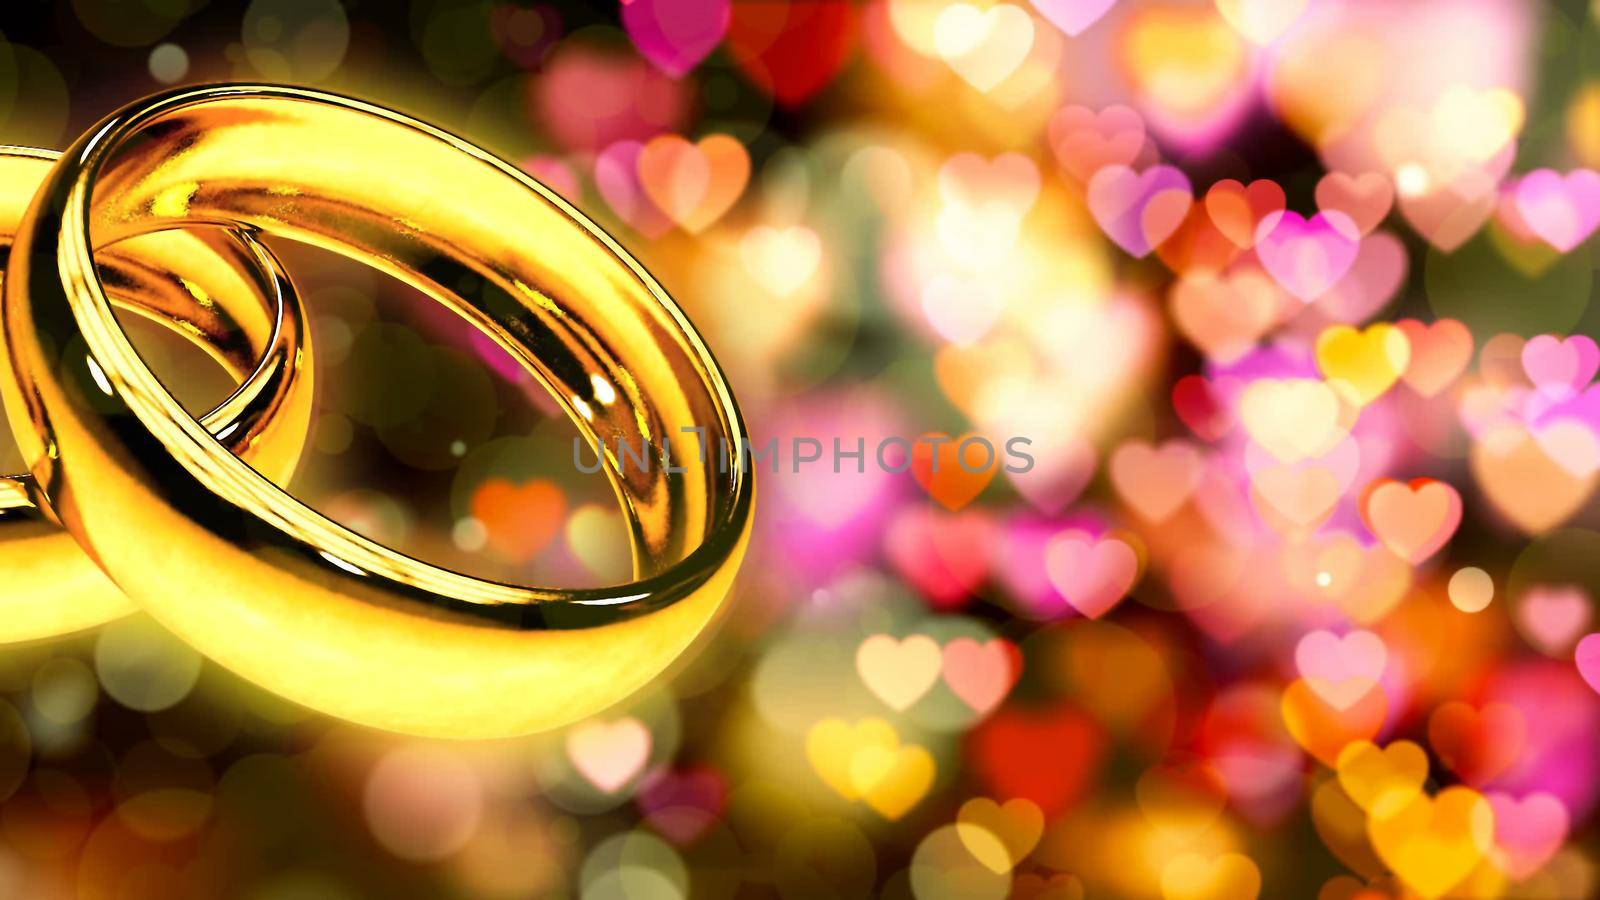 Abstract Background with two gold rings